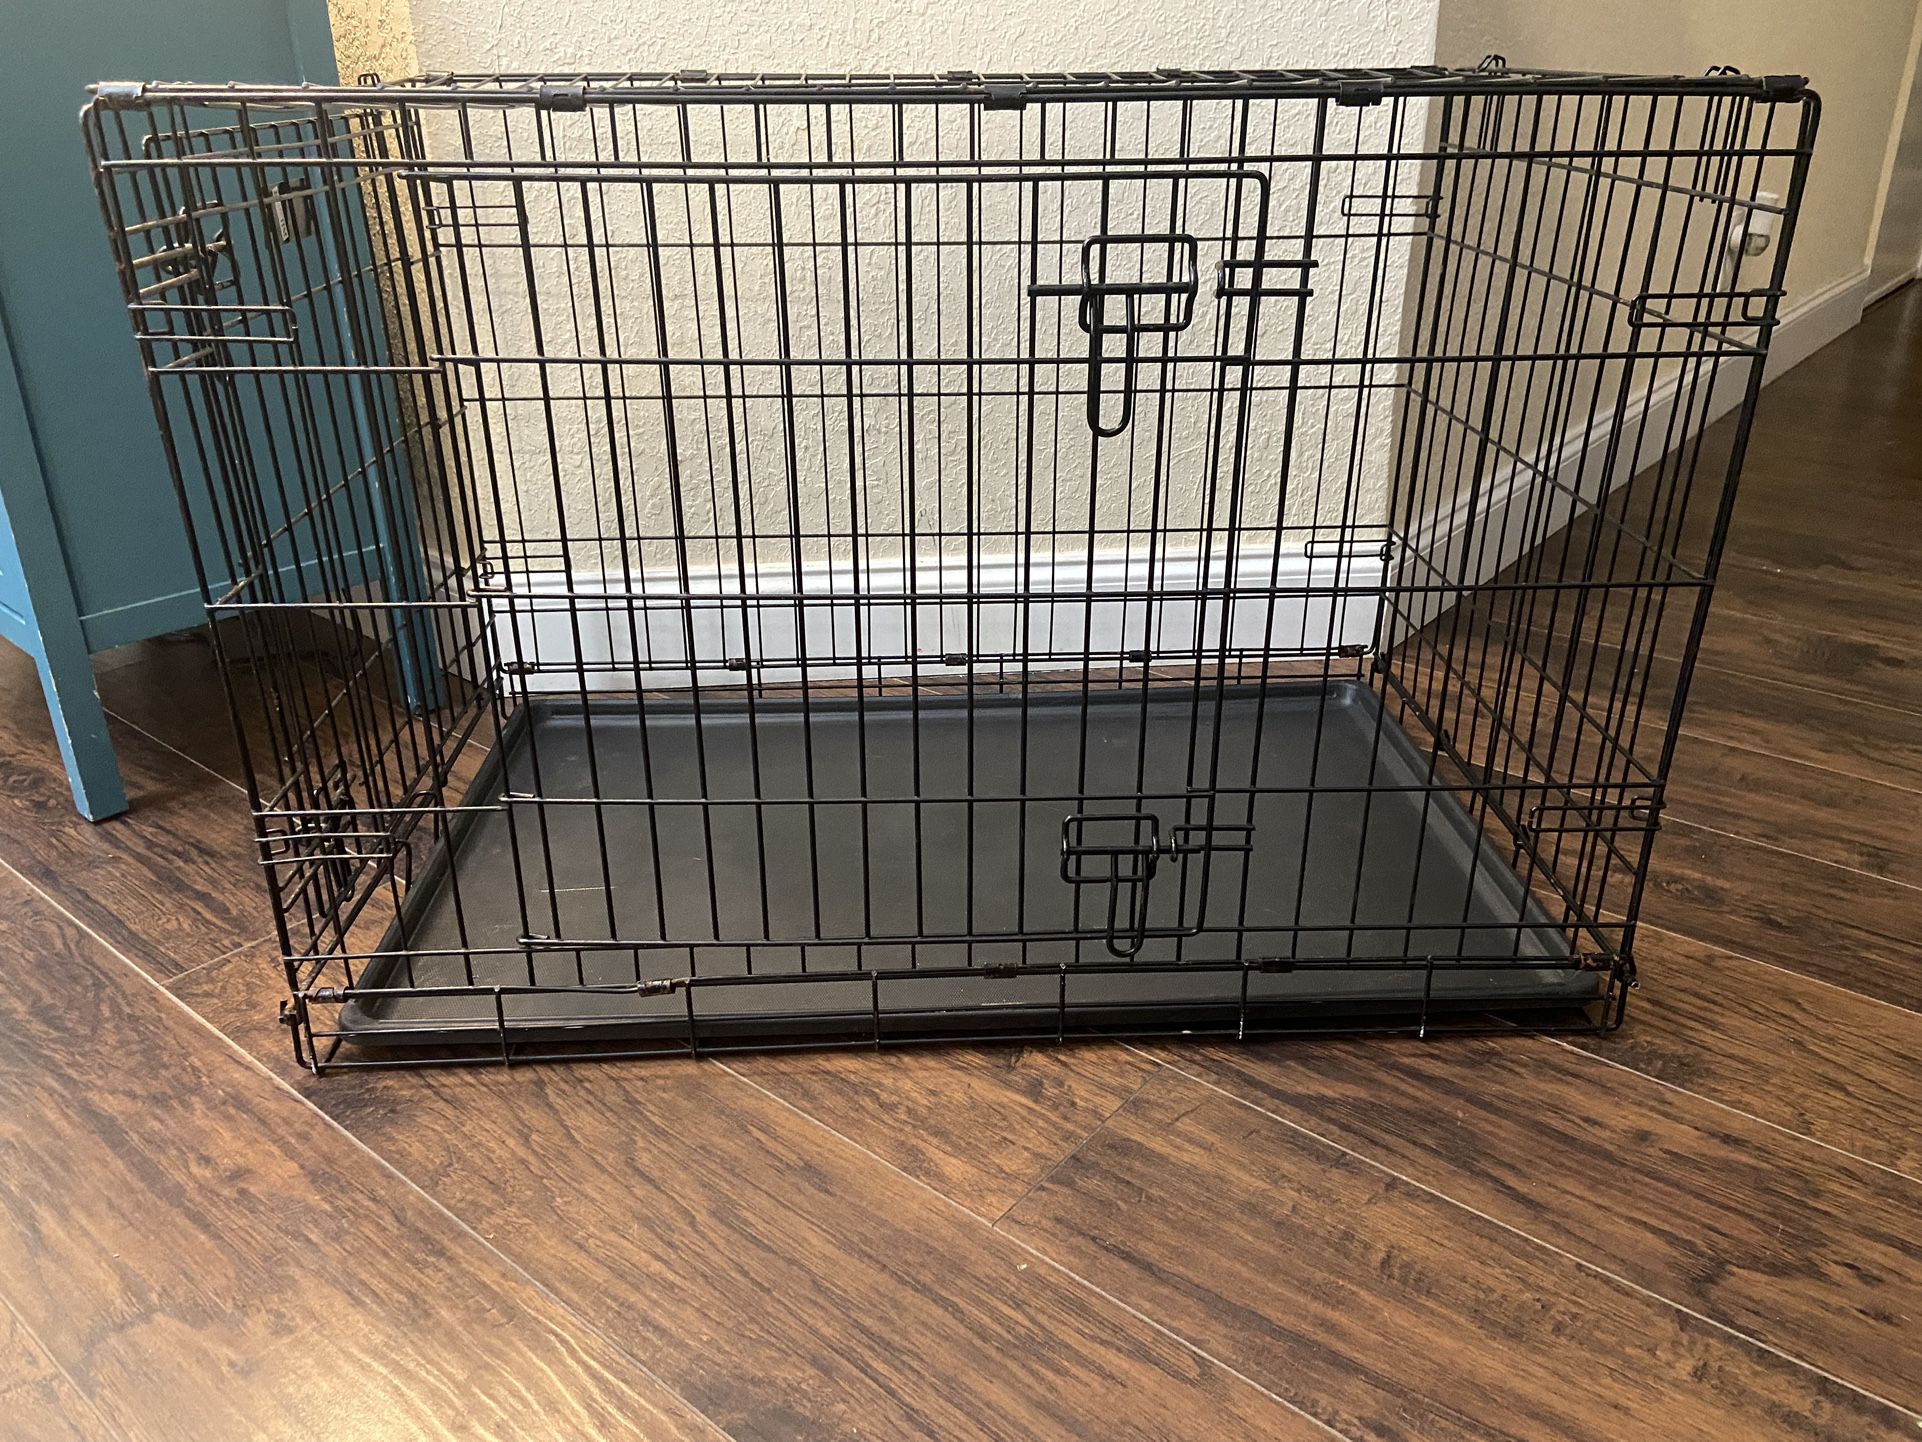 Crate Pet Carrier Large H24”, Deeep22”, W36”. 2 Doors. Foldable Crate. Located In Boca Raton. 